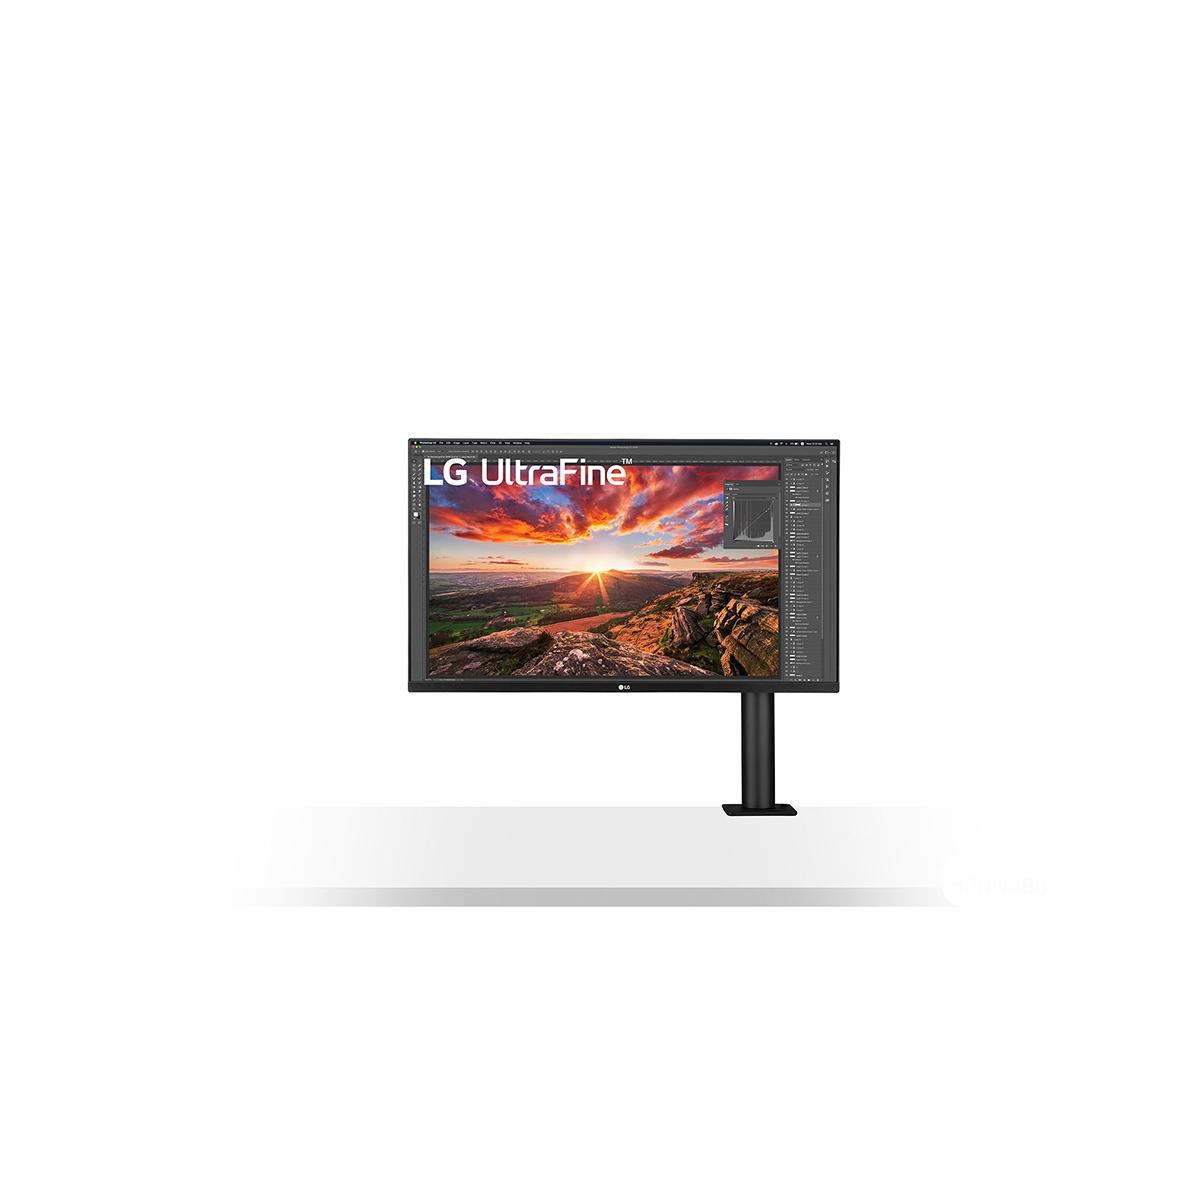 32” UHD UltraFine™ Monitor with HDR10 and USB Type-C™